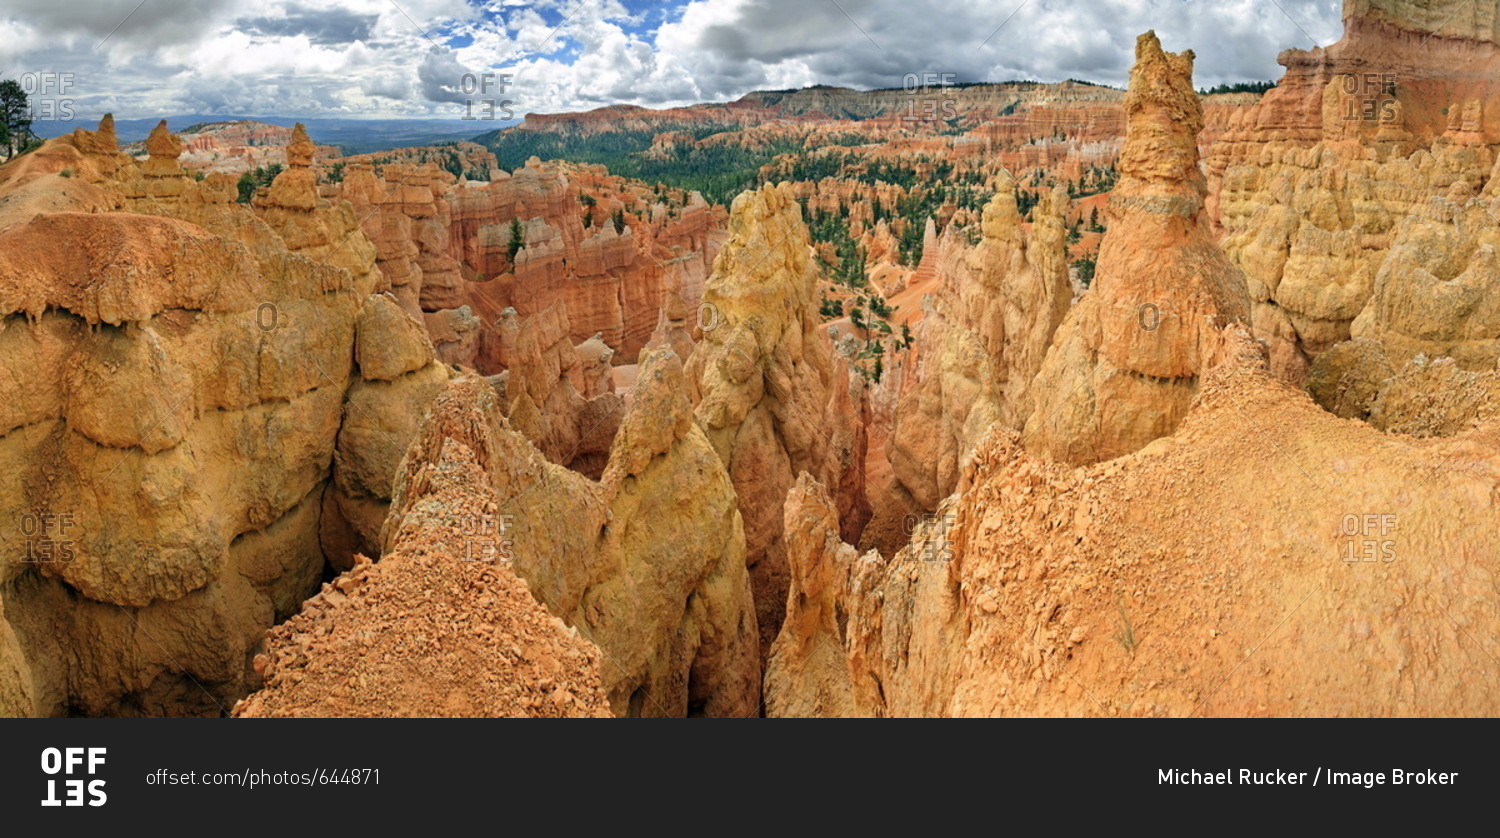 Amphitheater with sandstone pillars or hoodoos, landscape formed by erosion, Bryce Canyon National Park, Utah, United States, North America